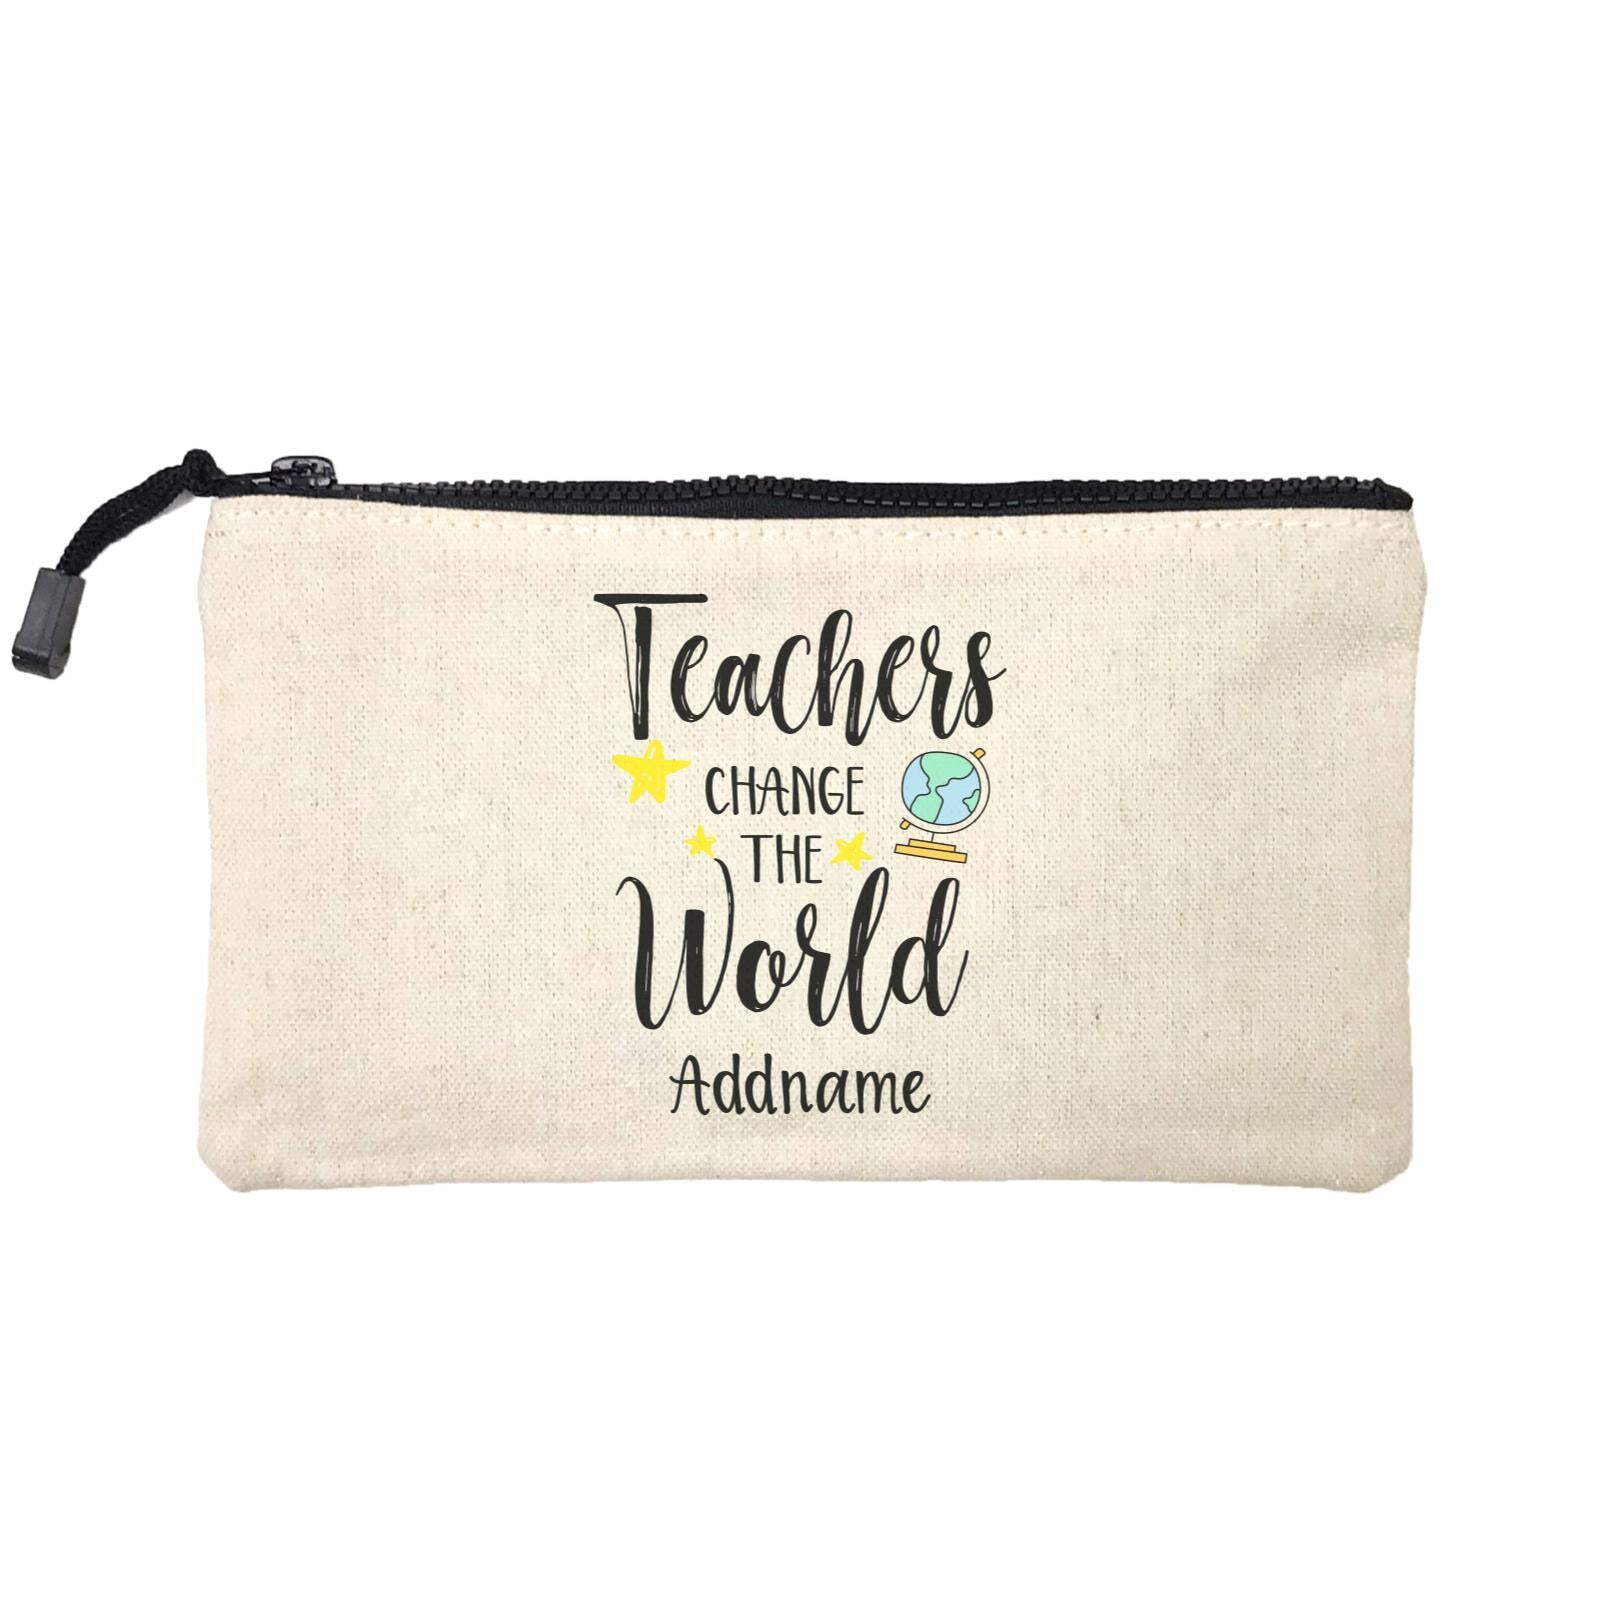 Teacher Quotes Teachers Change The World Addname Mini Accessories Stationery Pouch